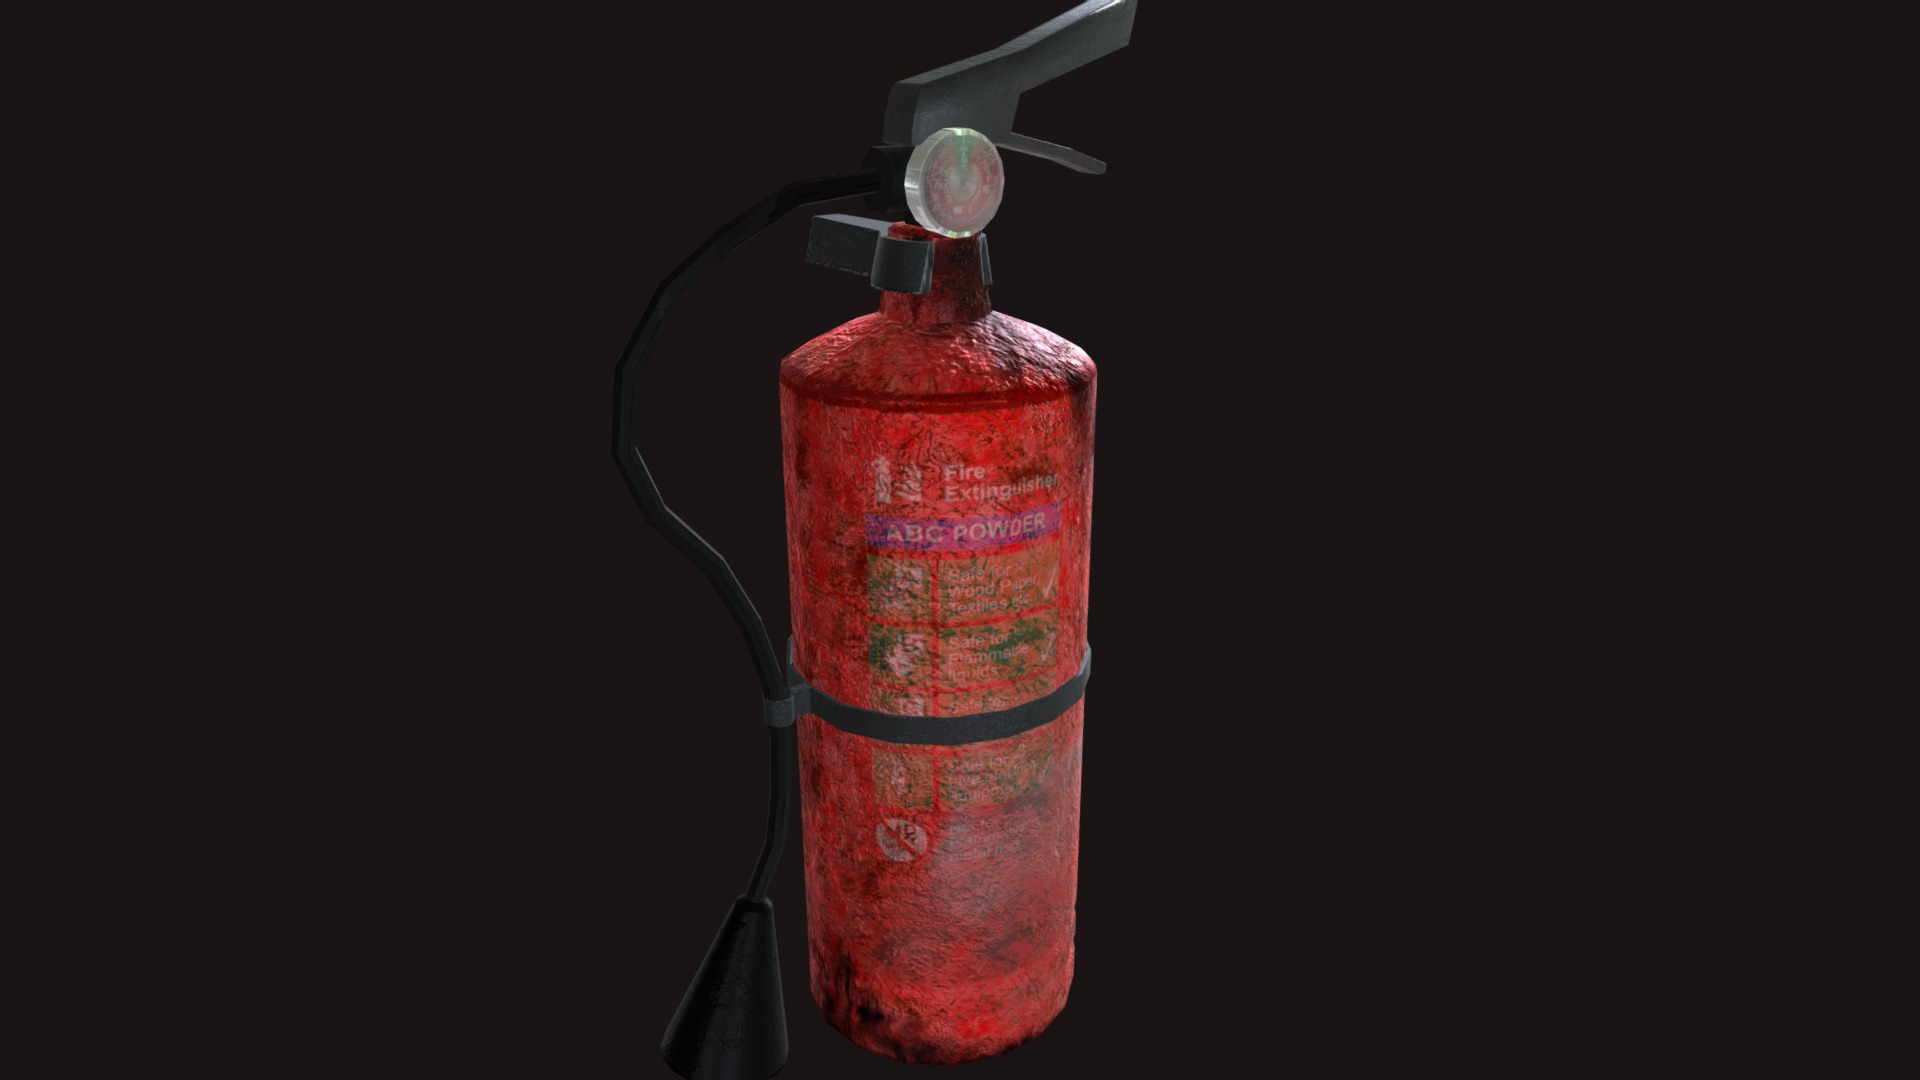 3D model Fire Extinguisher Rusted - This is a 3D model of the Fire Extinguisher Rusted. The 3D model is about a fire extinguisher with a hose attached.